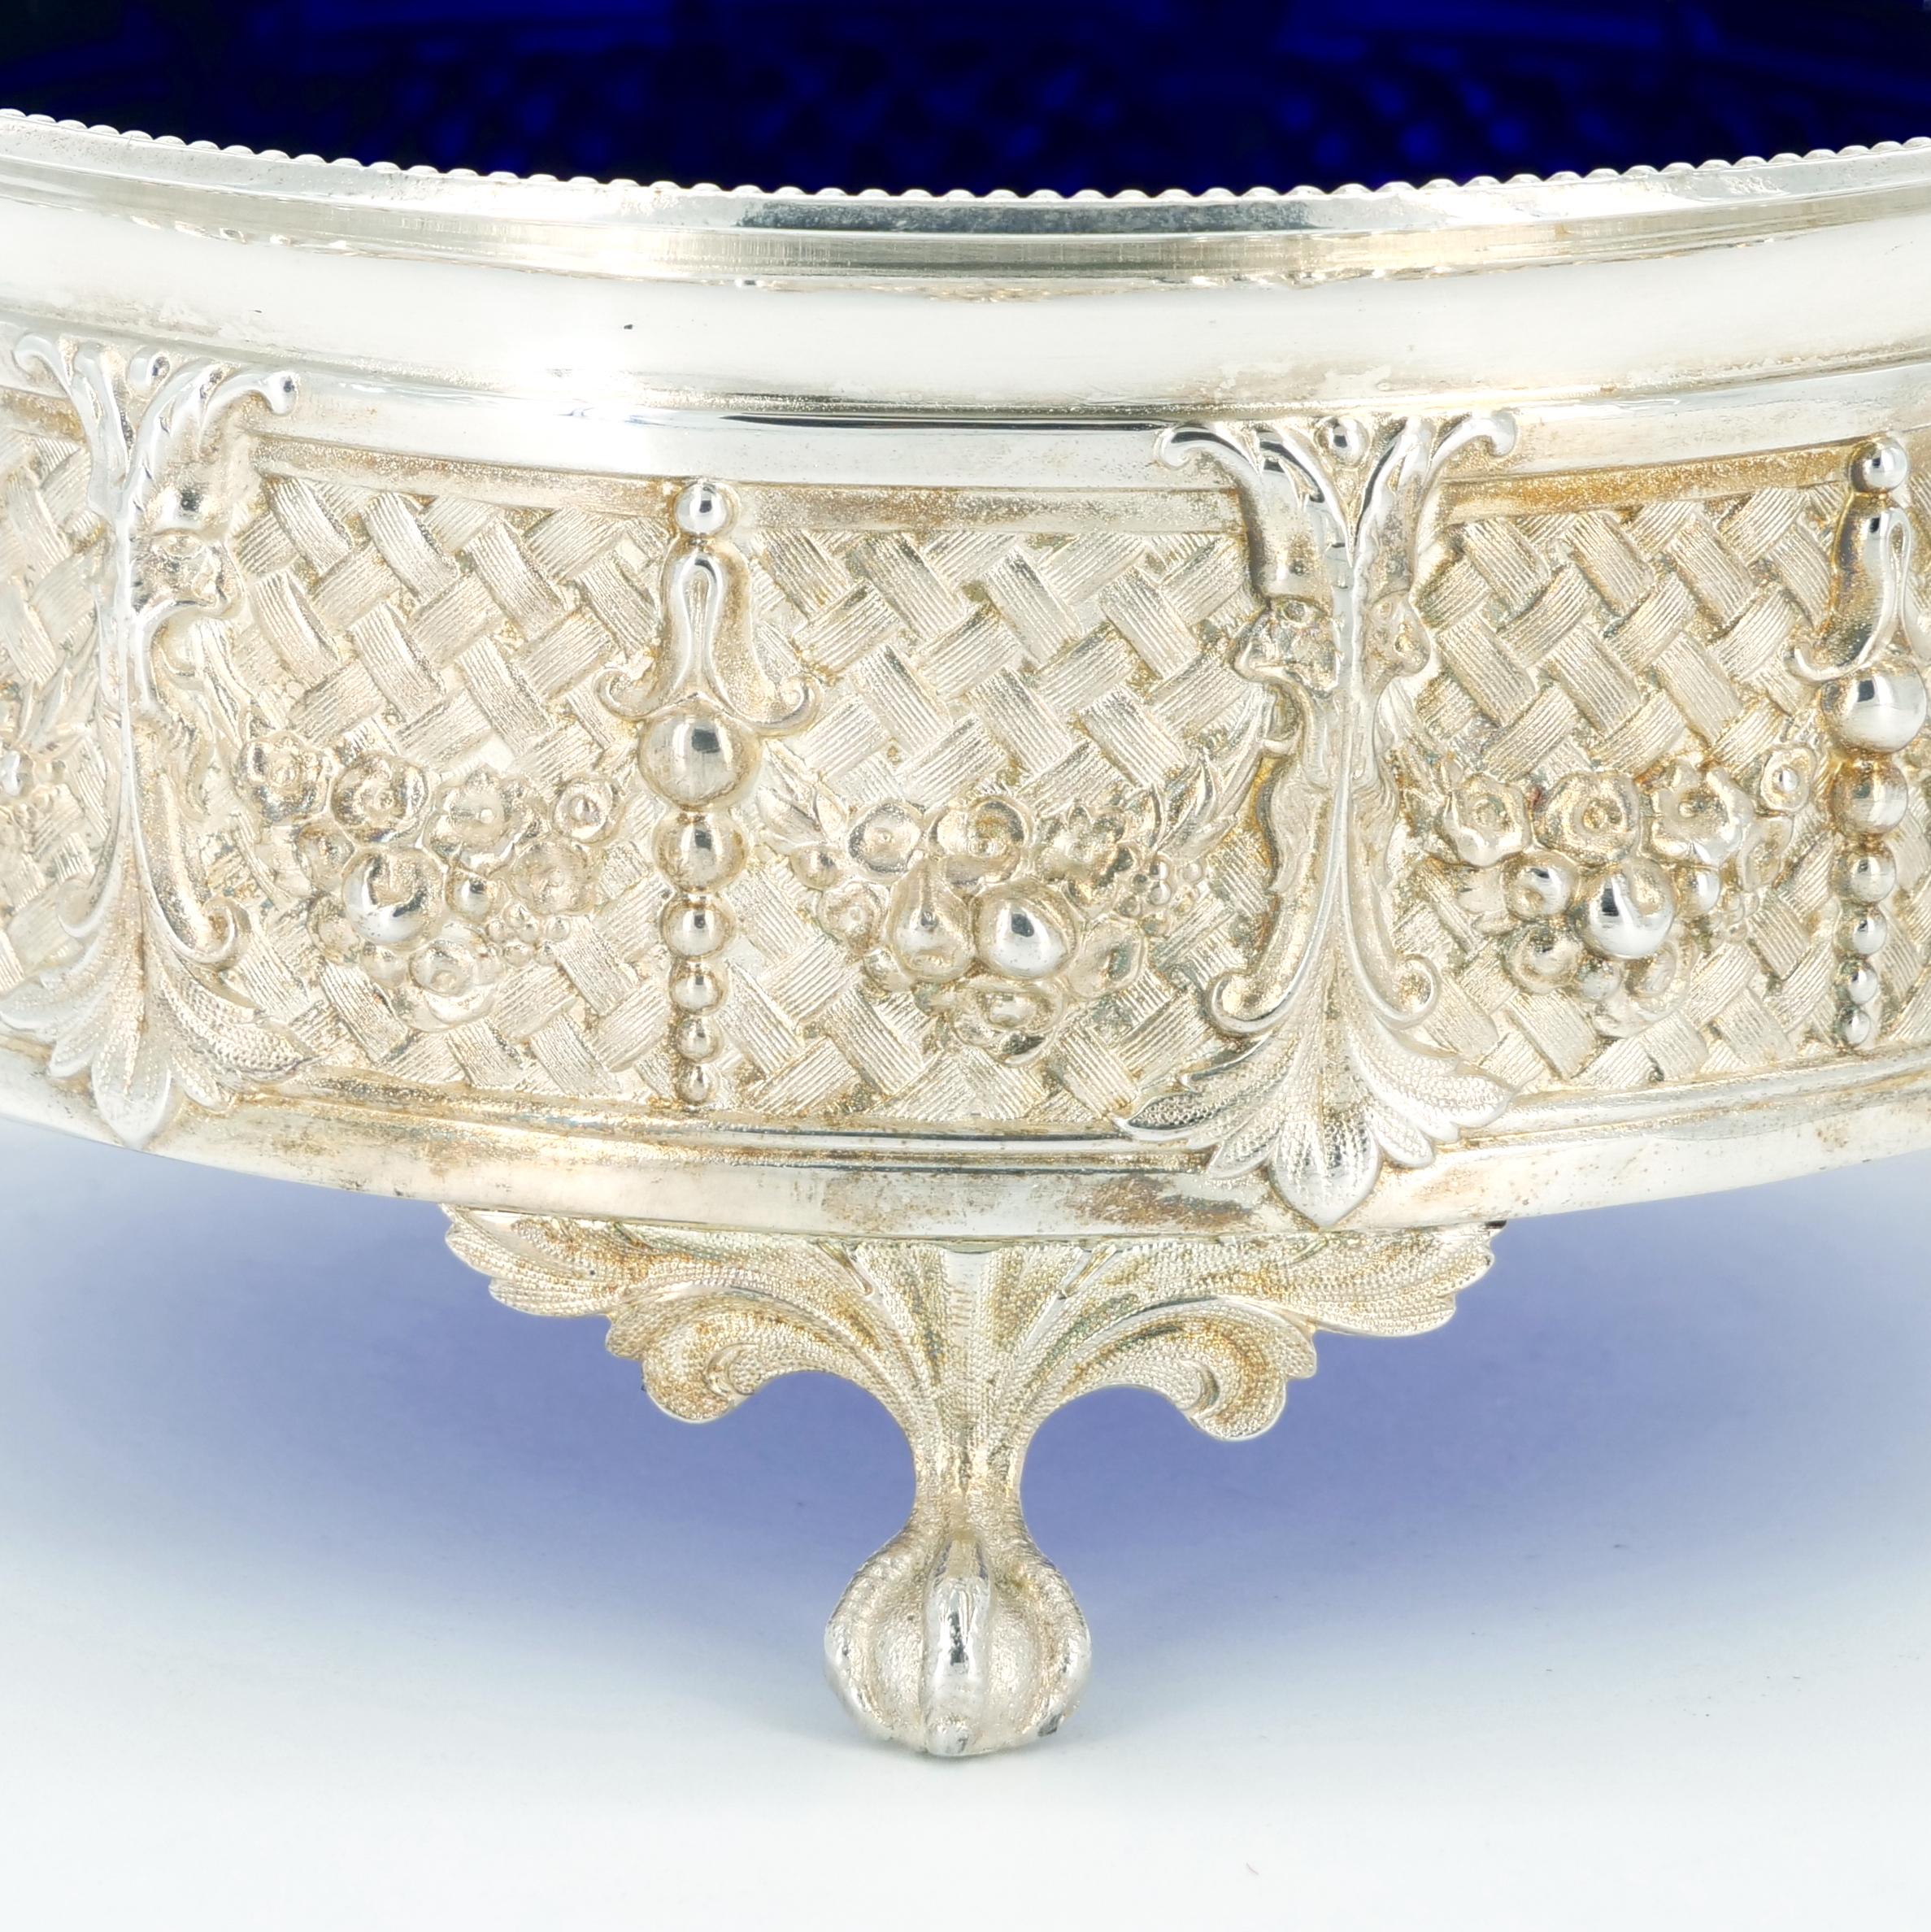 Late 19th Century Old English Silver Plate / Cobalt Glass Interior Serving Comport Disk For Sale